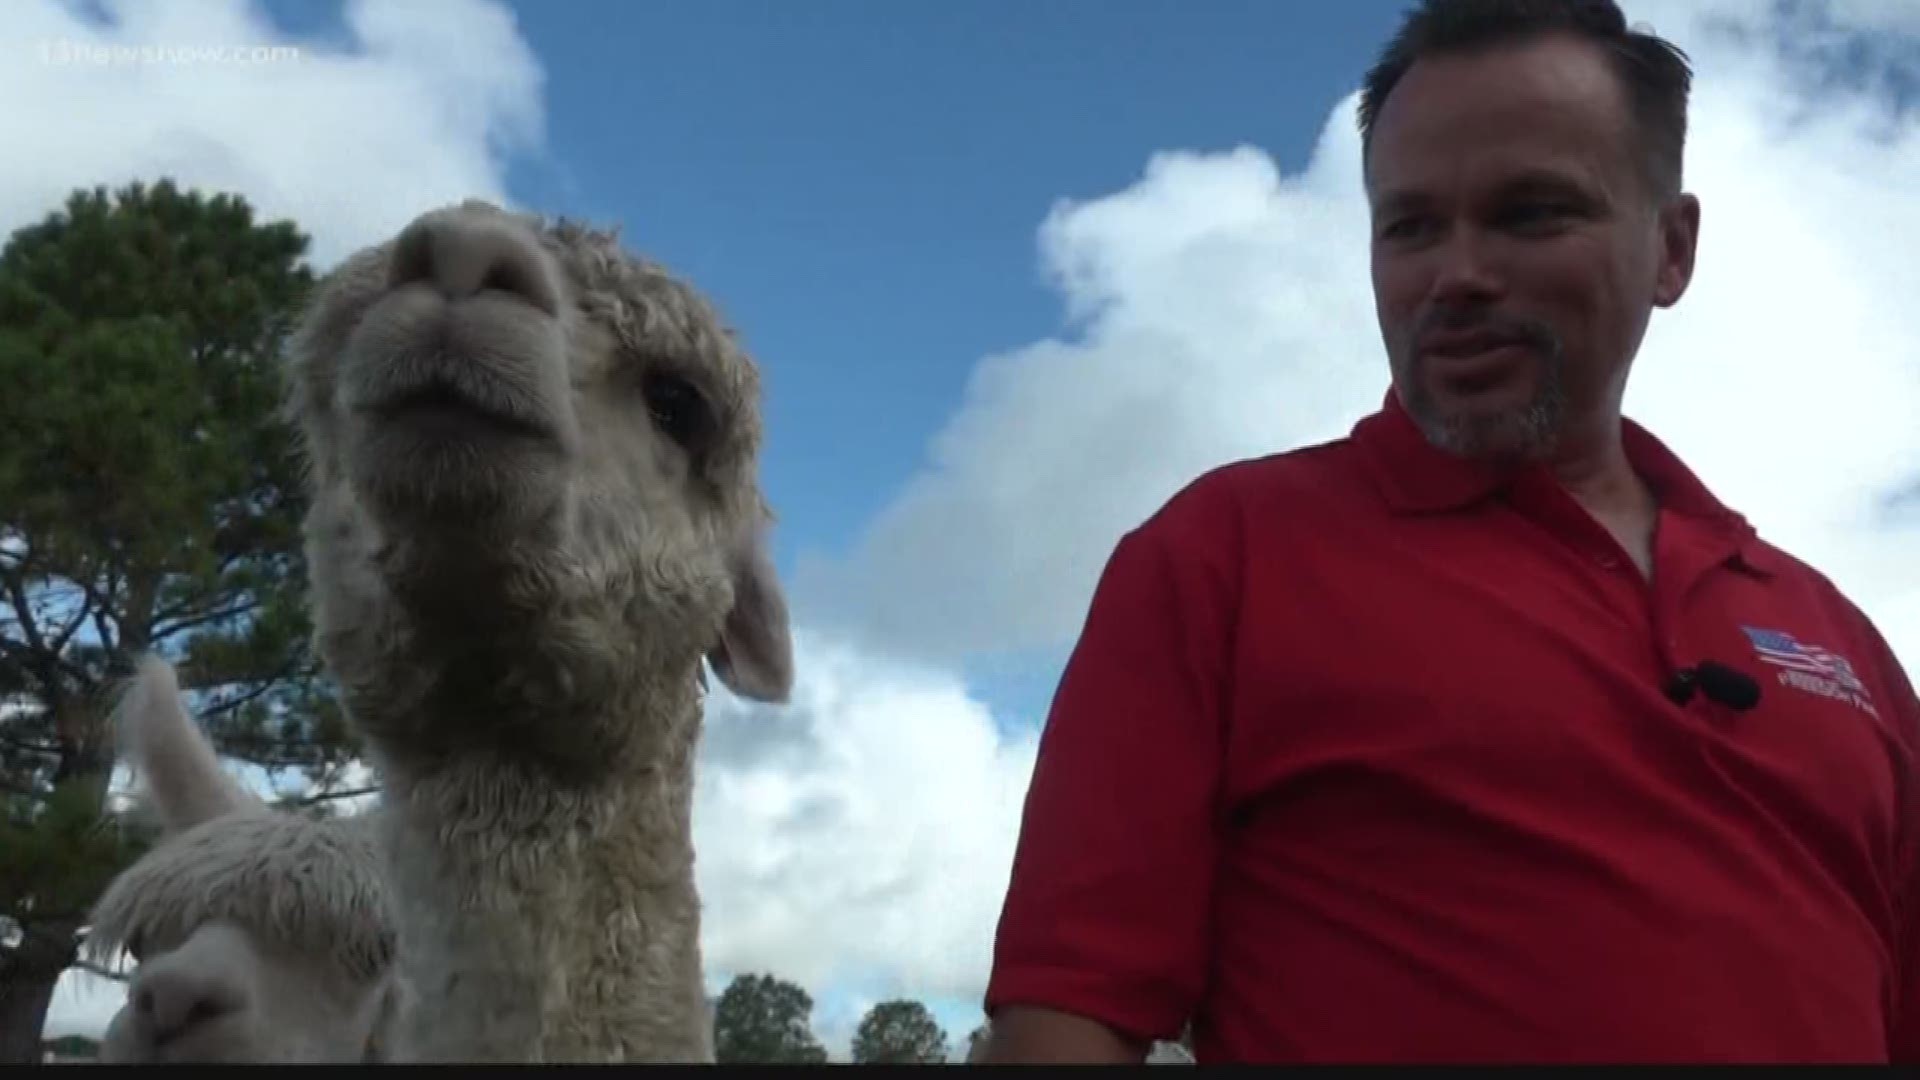 Sound of Freedom Farm owner Will Burney said jet engines inspired the patriotic name of his alpaca business in Virginia Beach.